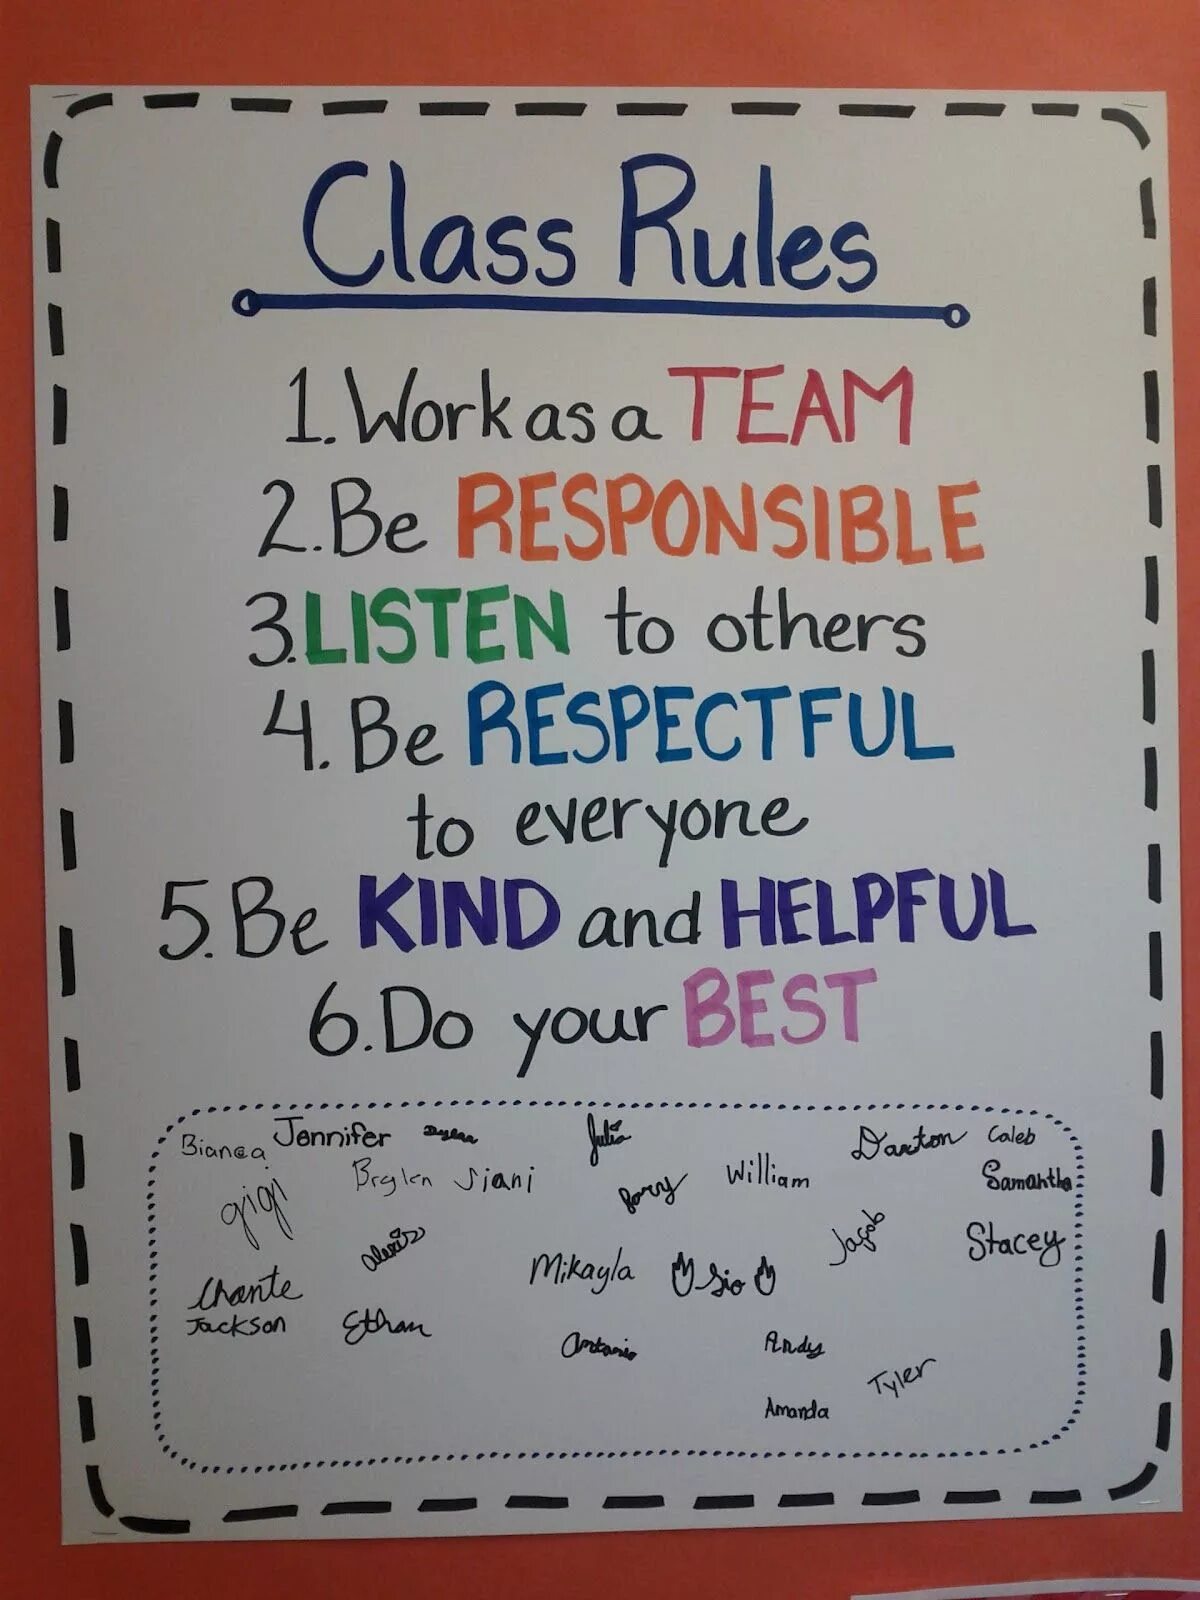 Do our best. Class Rules. Rules in class. Class Rules по английскому языку. Class Rules for students.